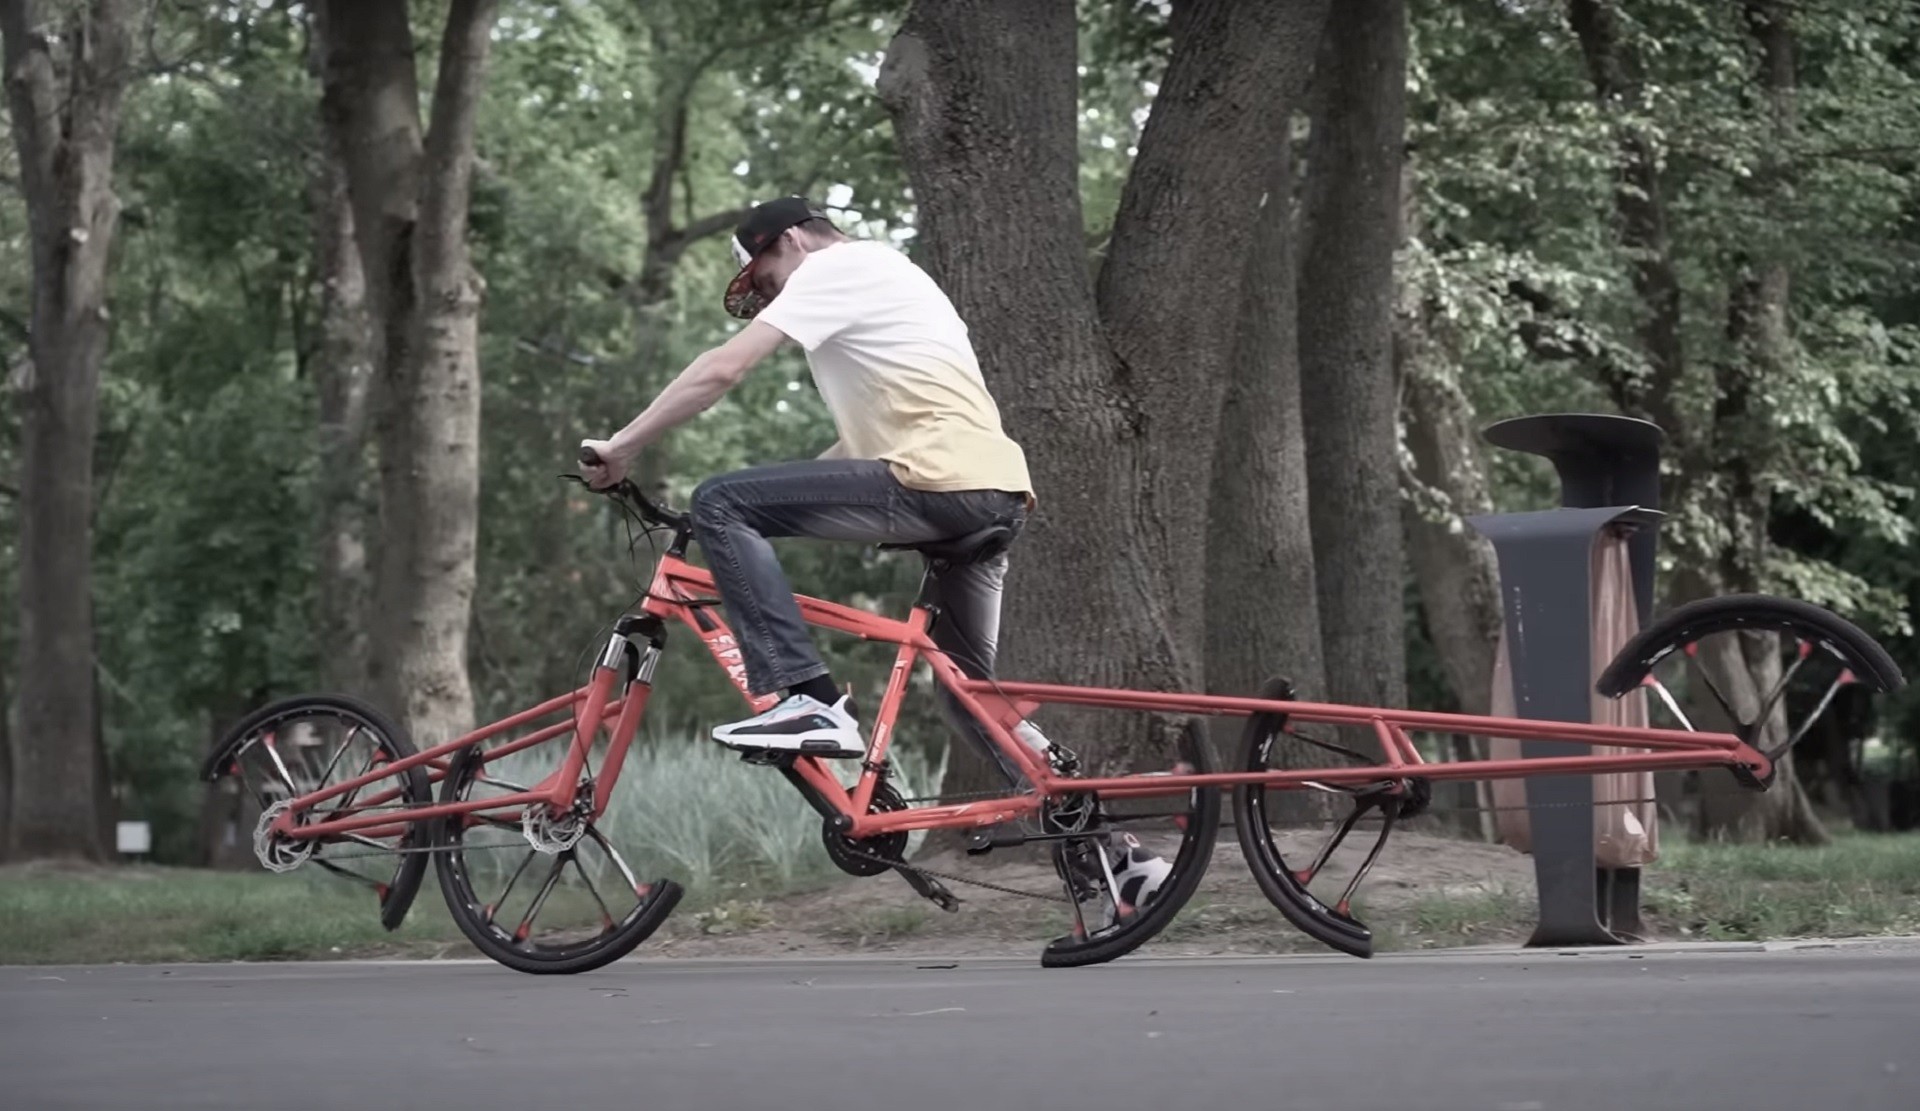 this split wheel vehicle is probably the most overcomplicated pedal cycle design out there 4